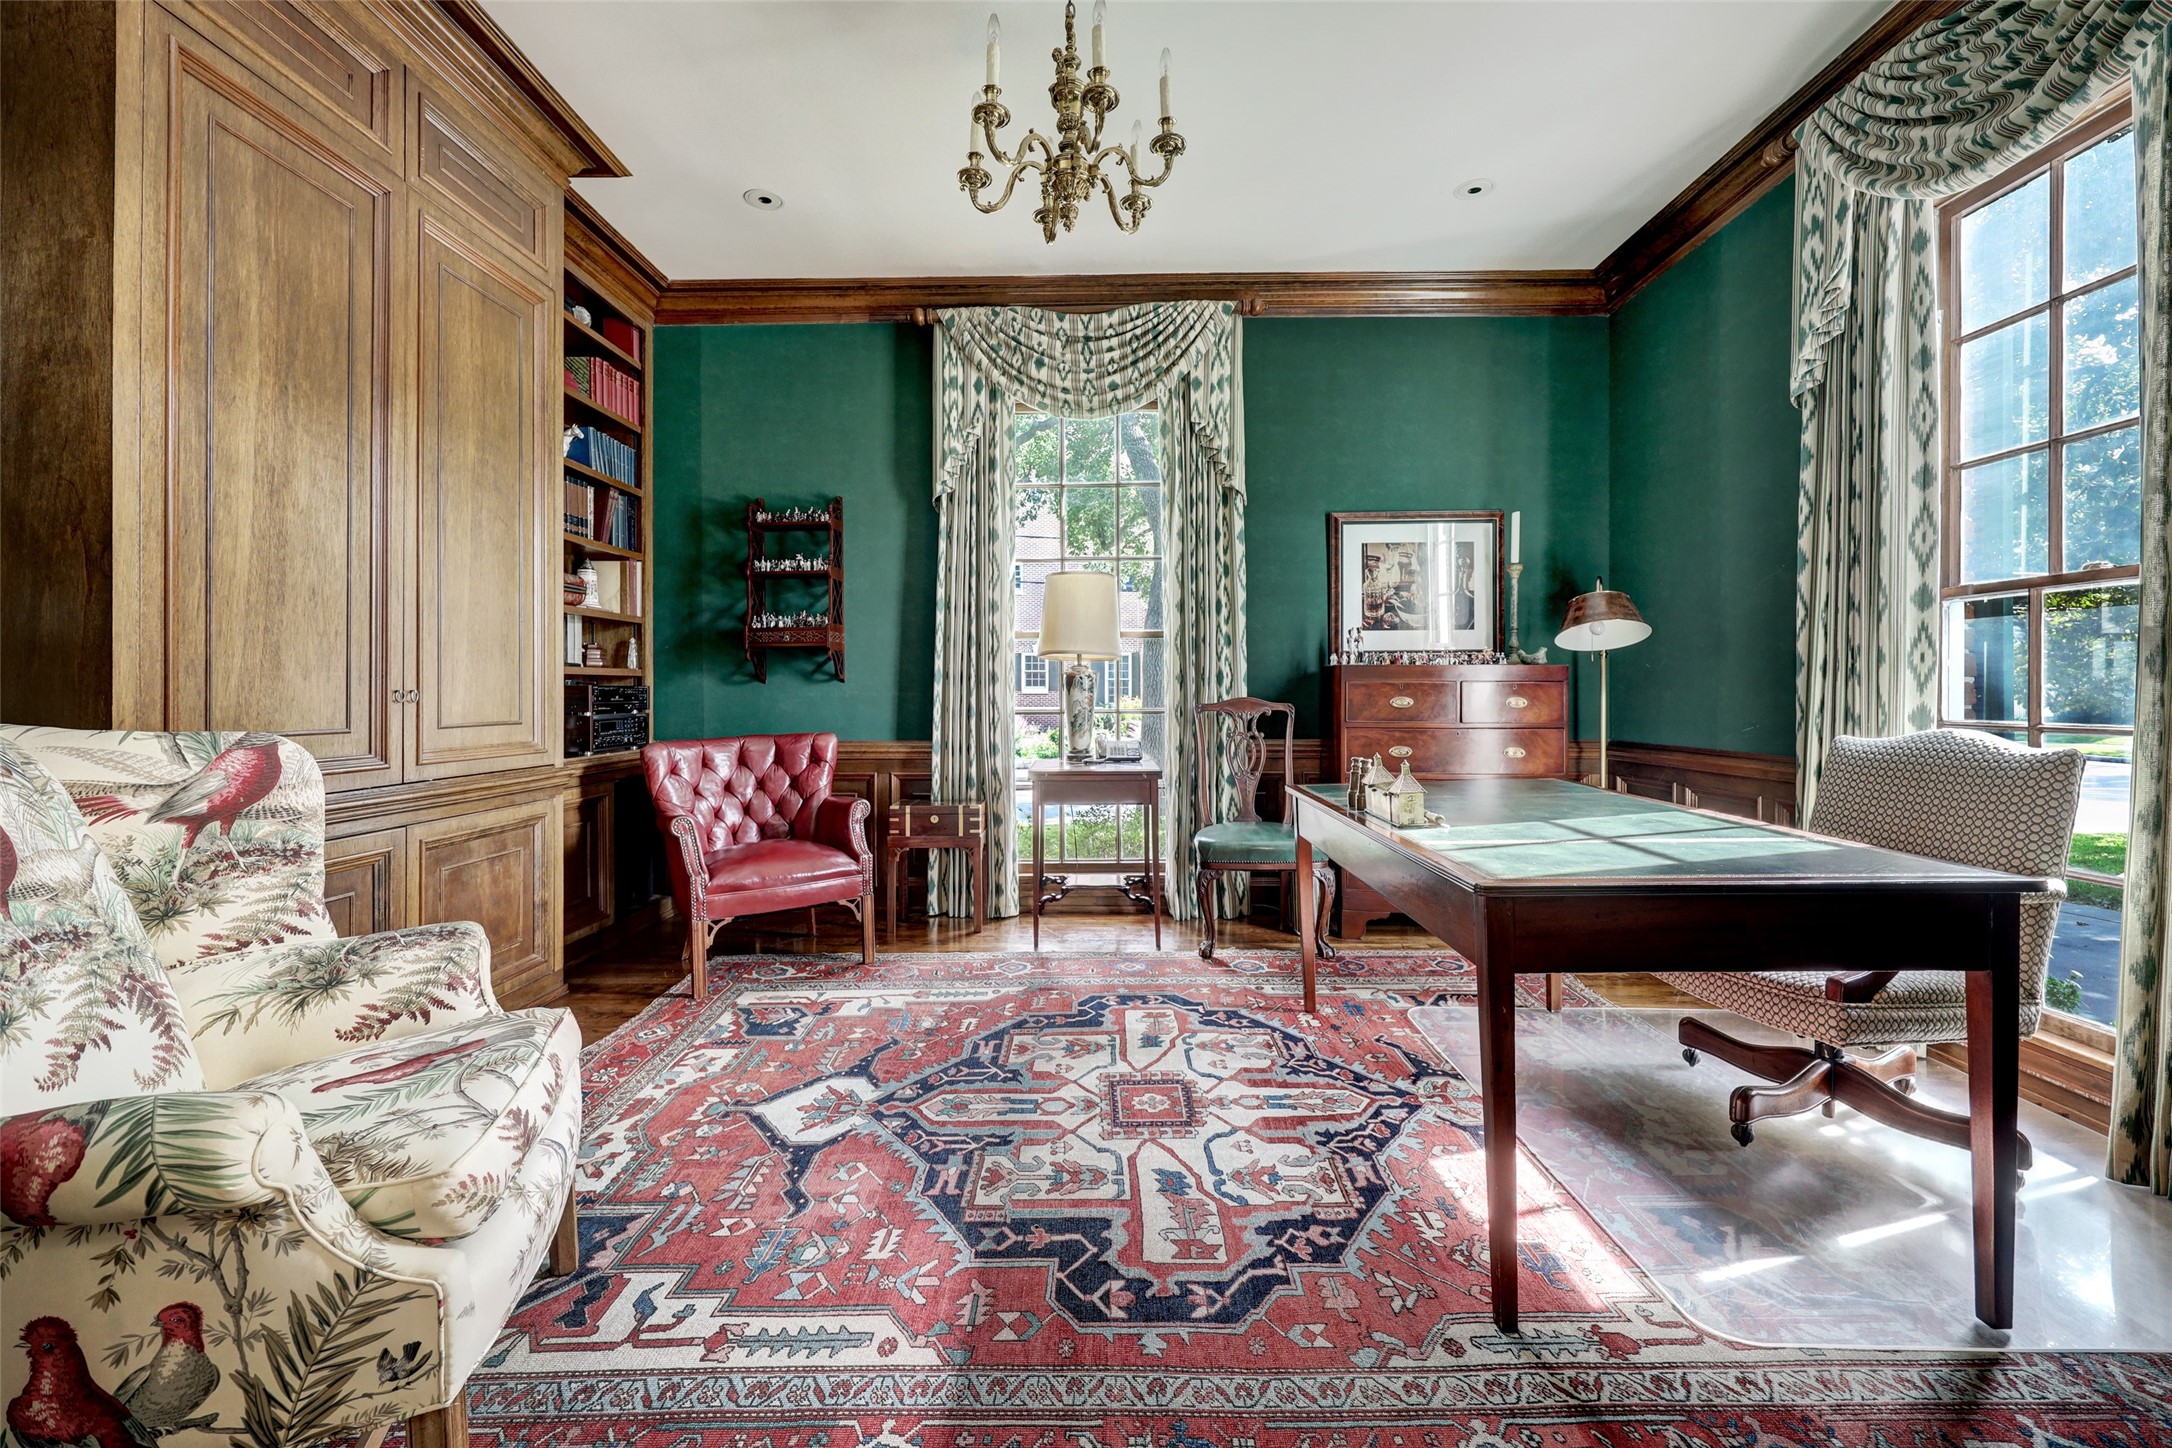 The stately library/home office boasts built-in shelves and drawers as well as large windows that frame views of the front gardens and infuse the room with natural light and a serene atmosphere.